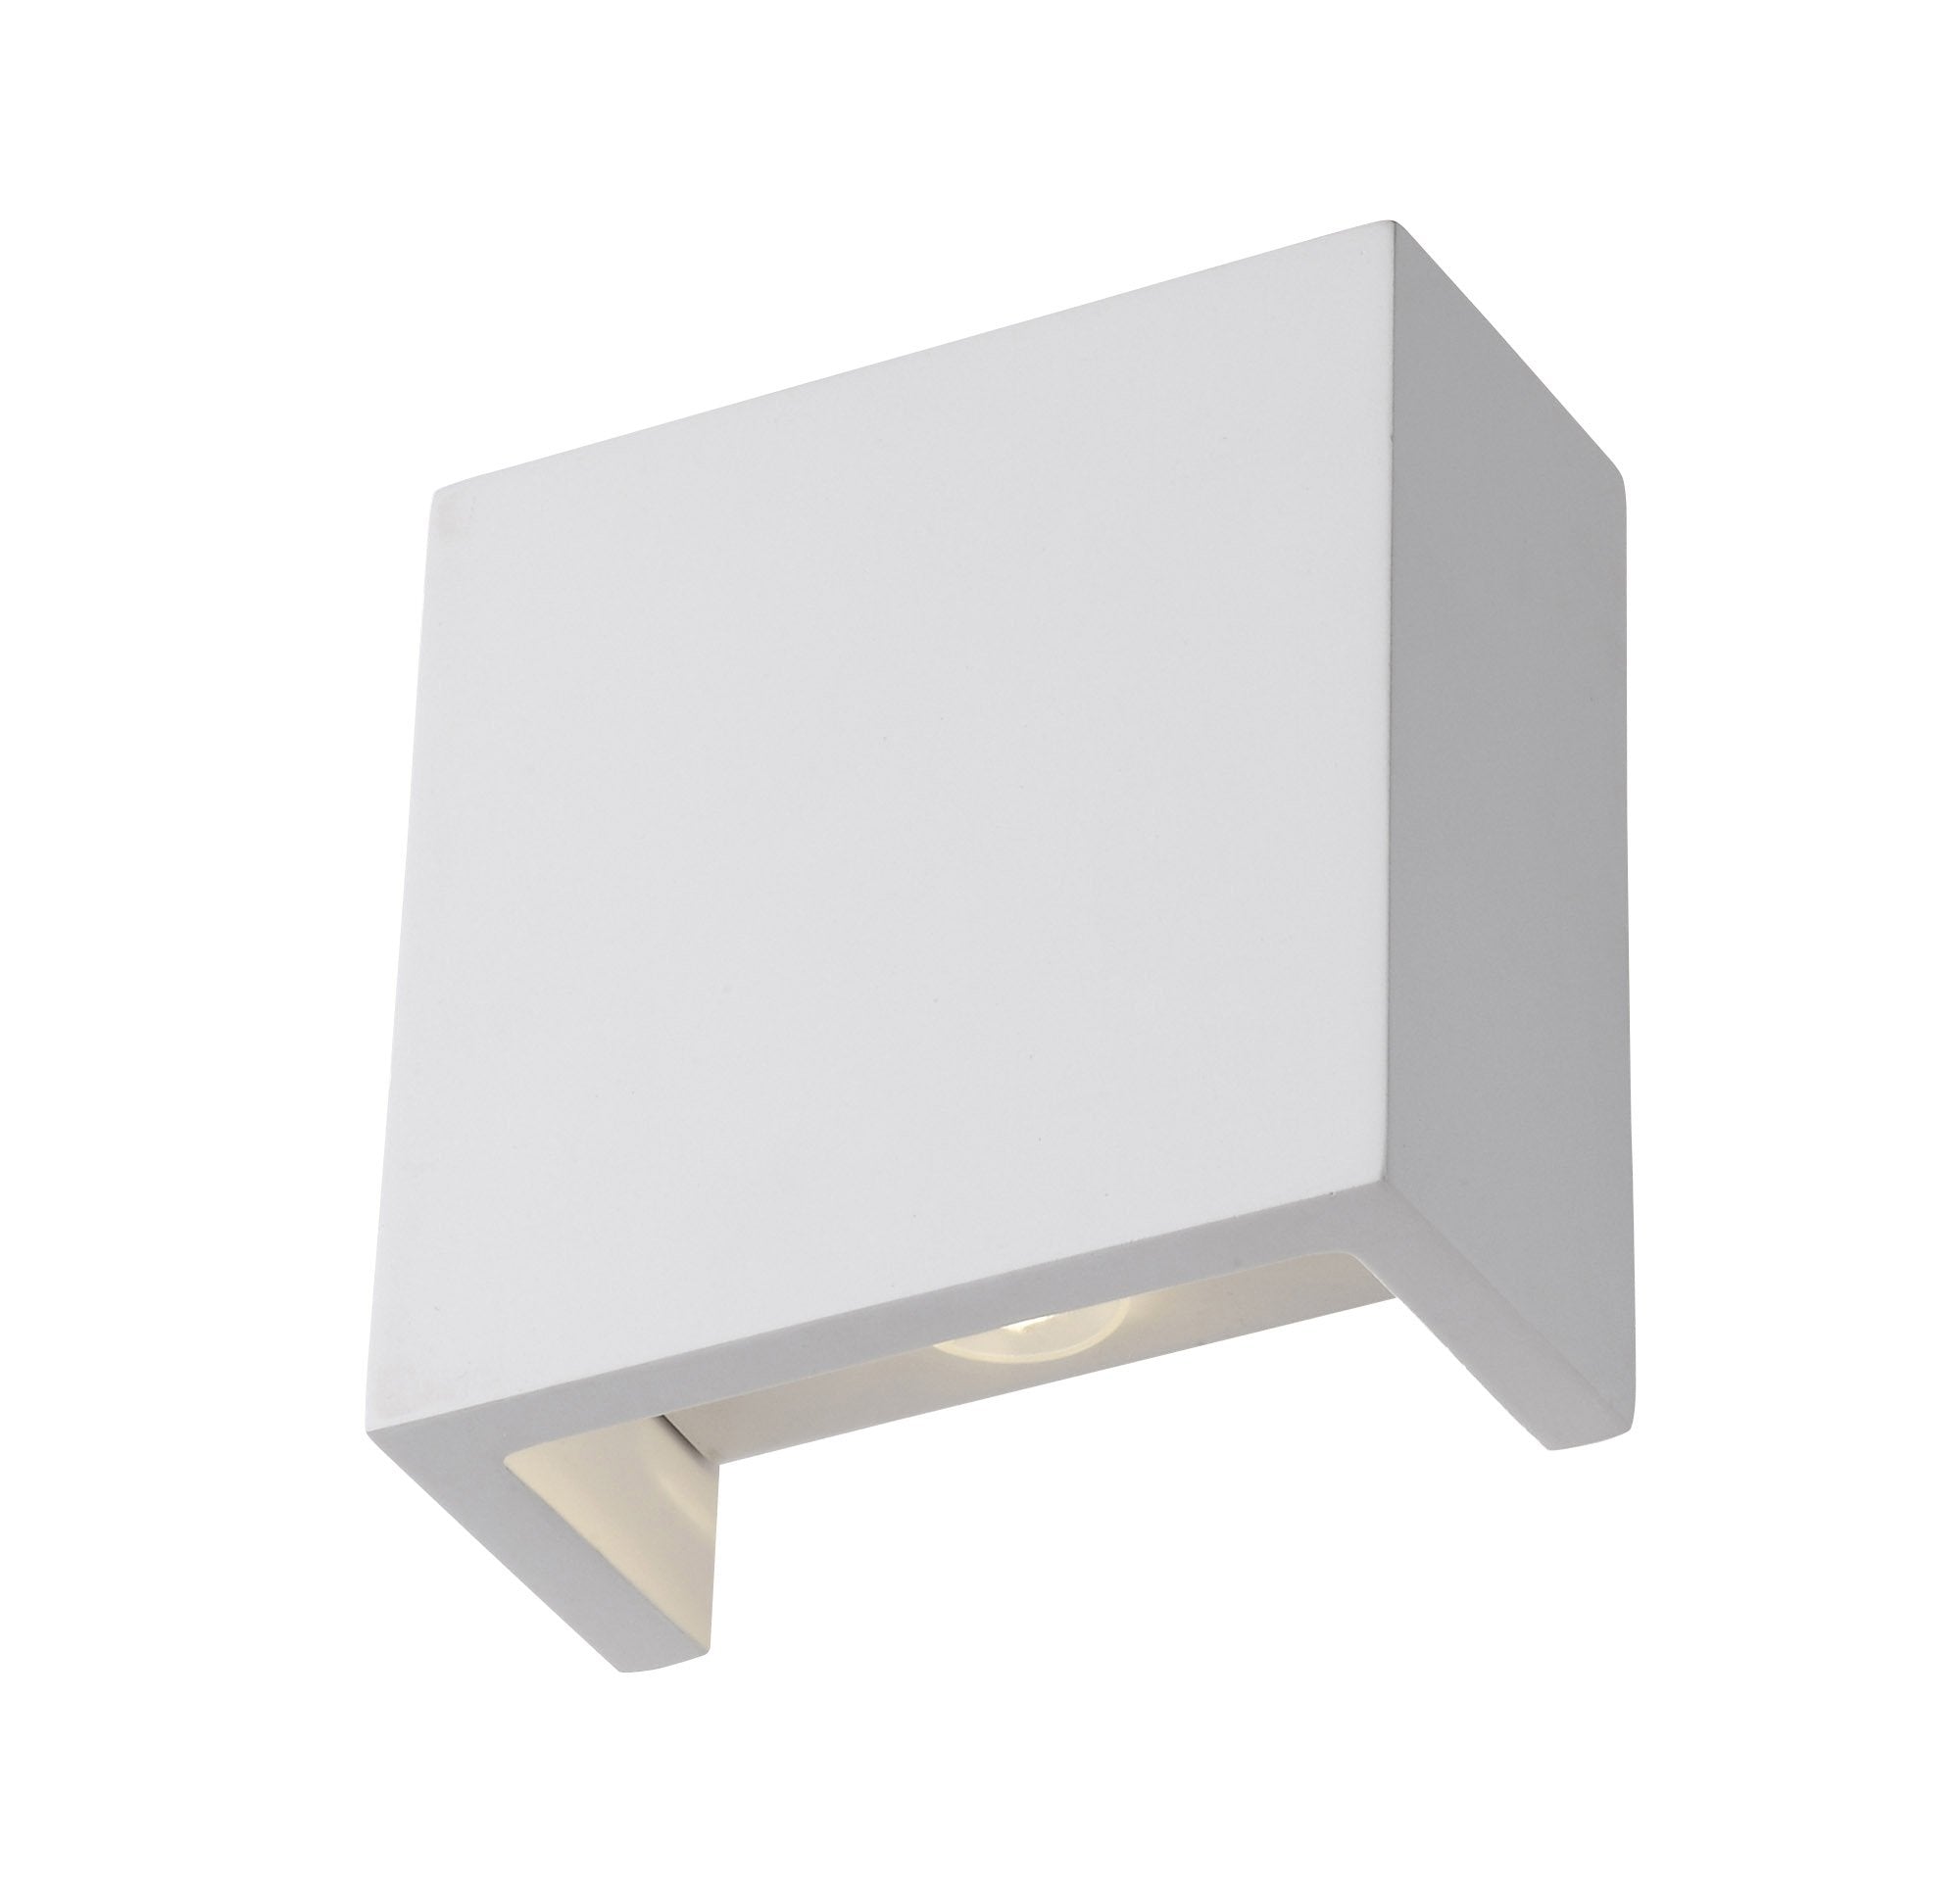 Gypsum square up & down wall LED light